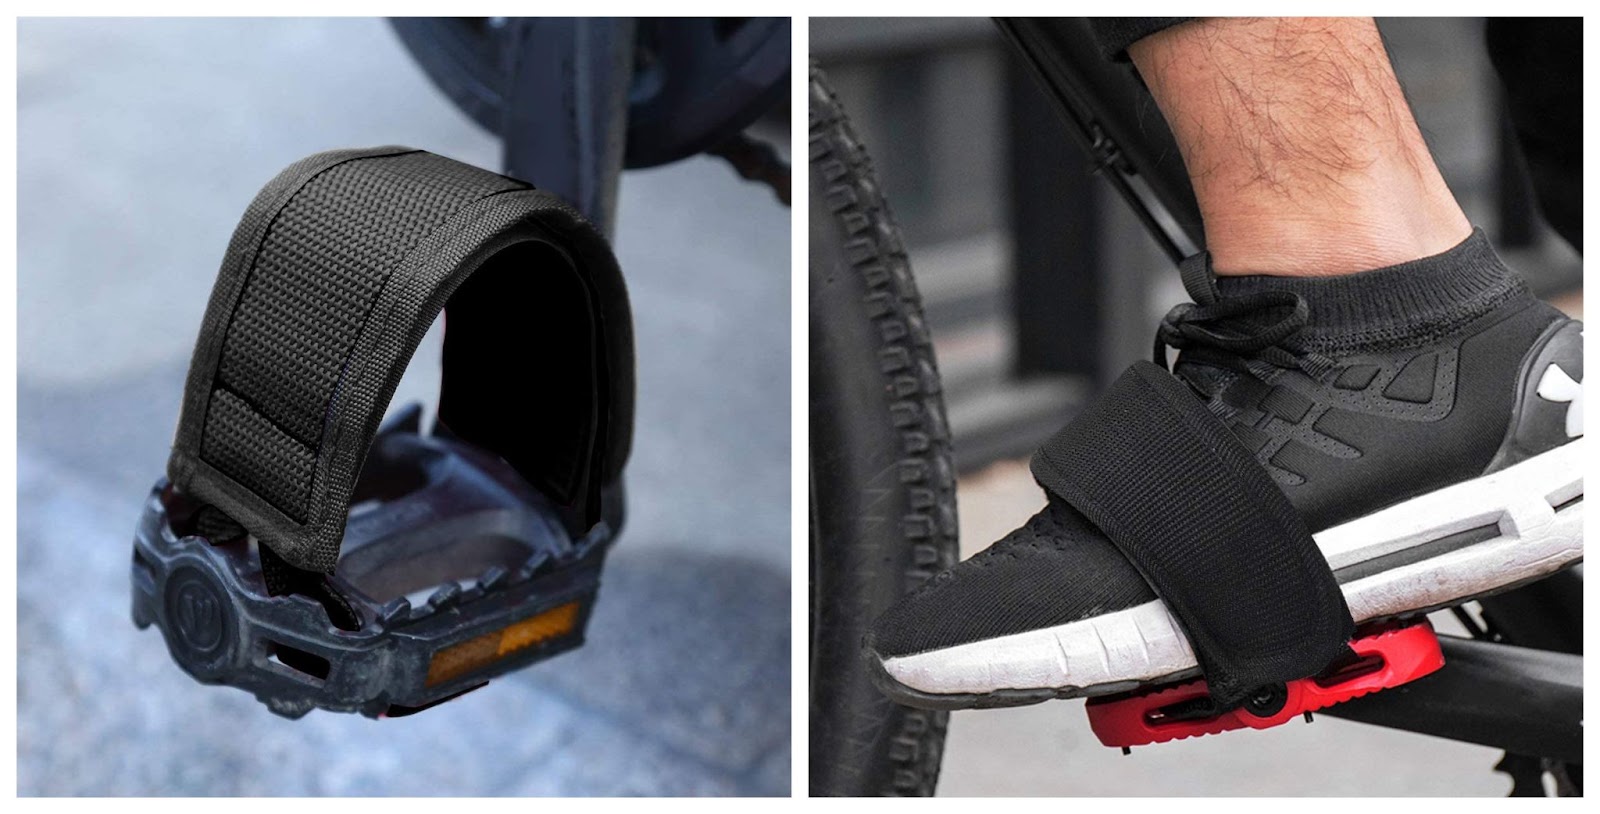 Make sure that the straps are fastened snugly around your feet before setting off on your ride to ensure your safety and comfort.